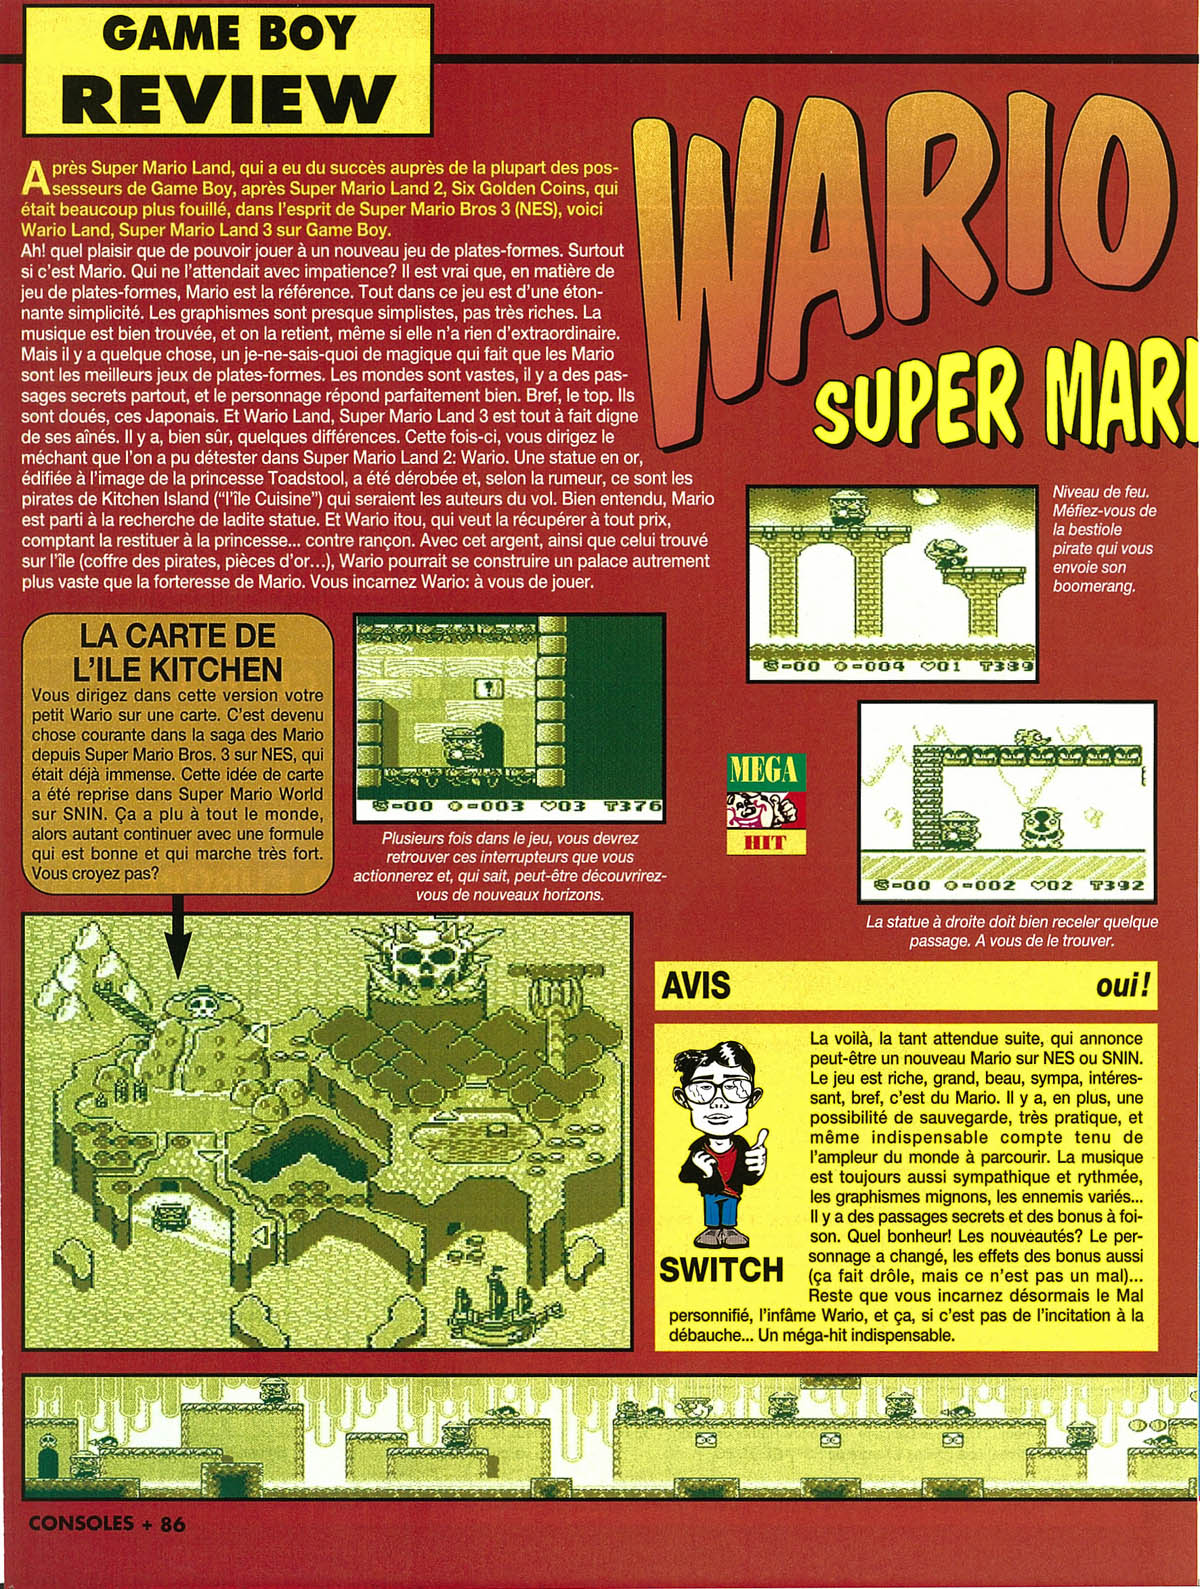 tests//51/Consoles + 031 - Page 086 (avril 1994).jpg